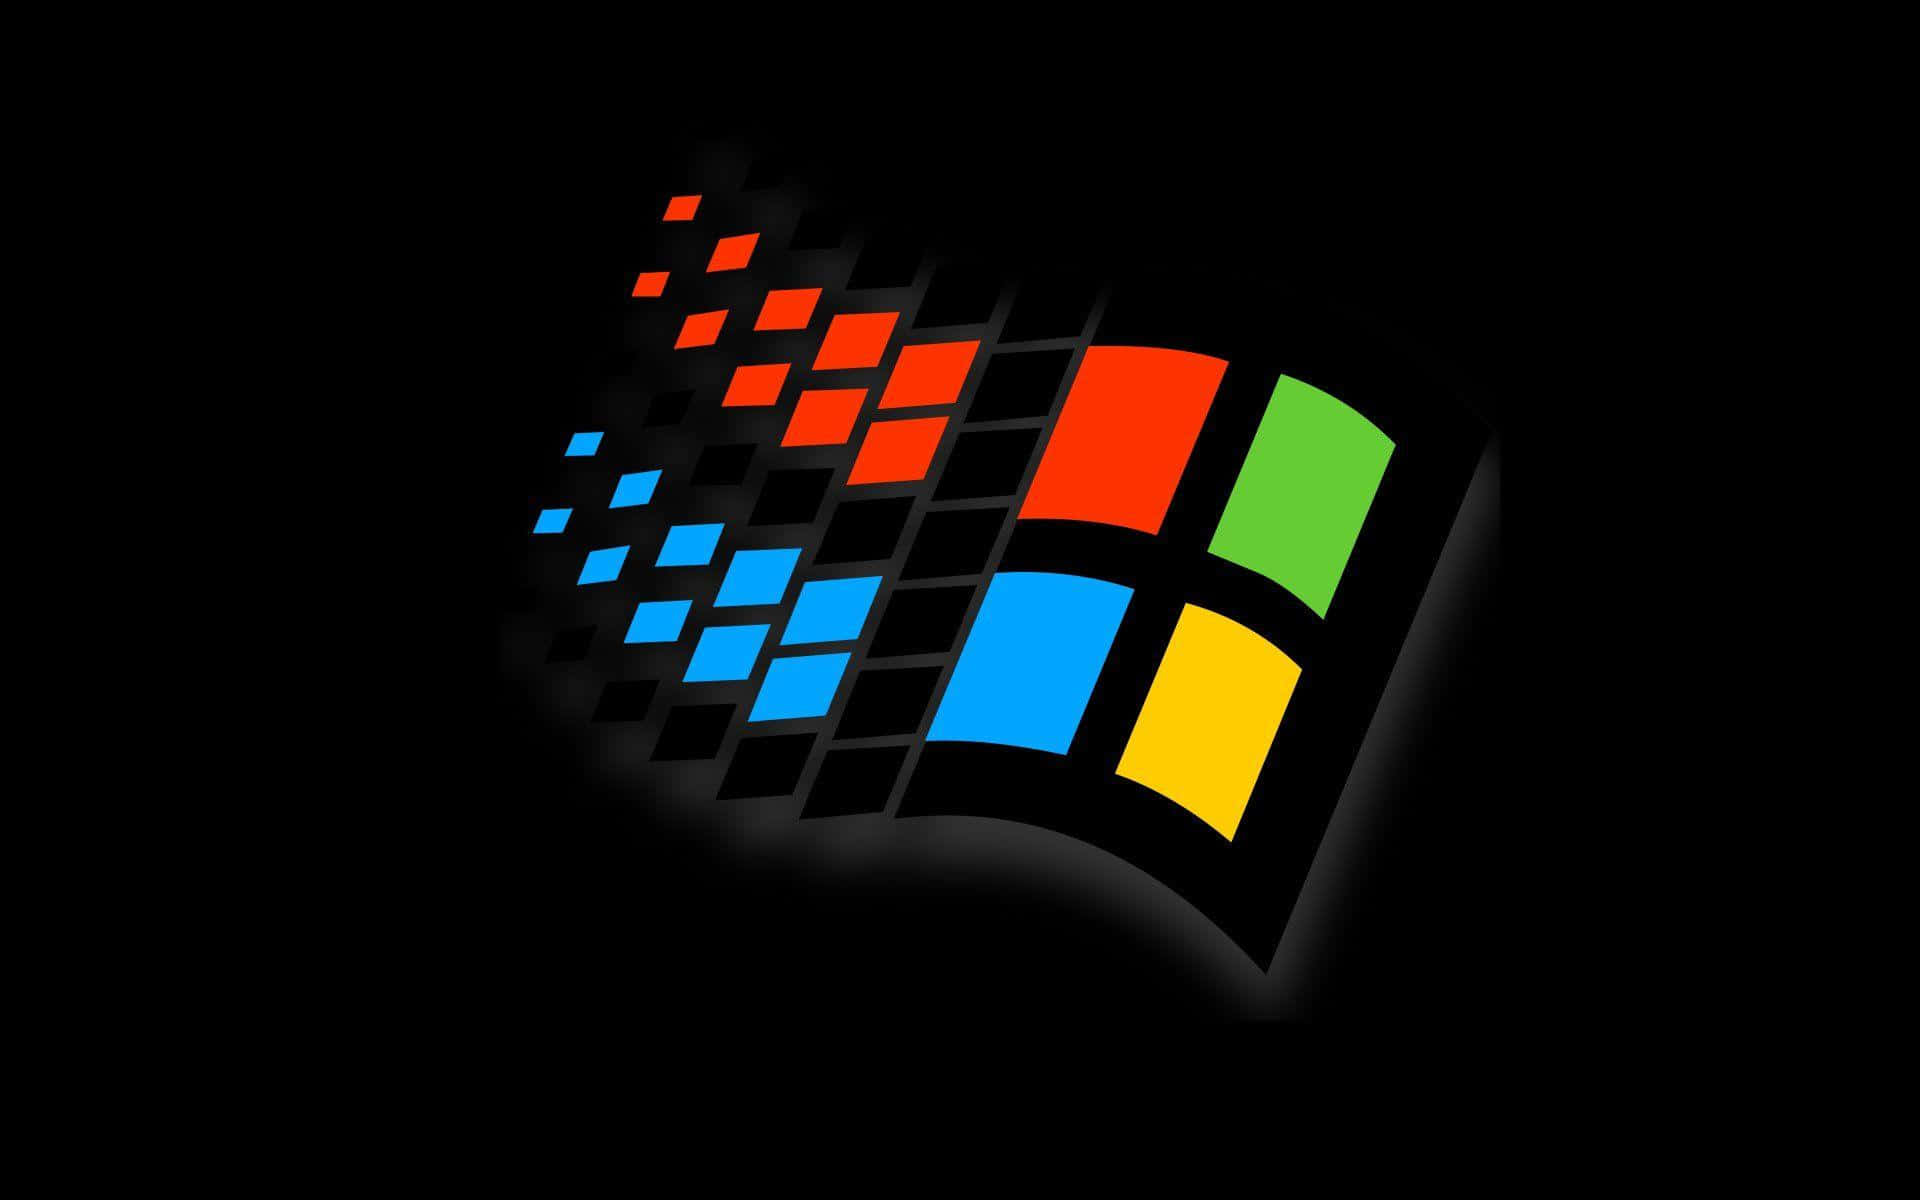 A graphical representation of the Windows 95 logo and background